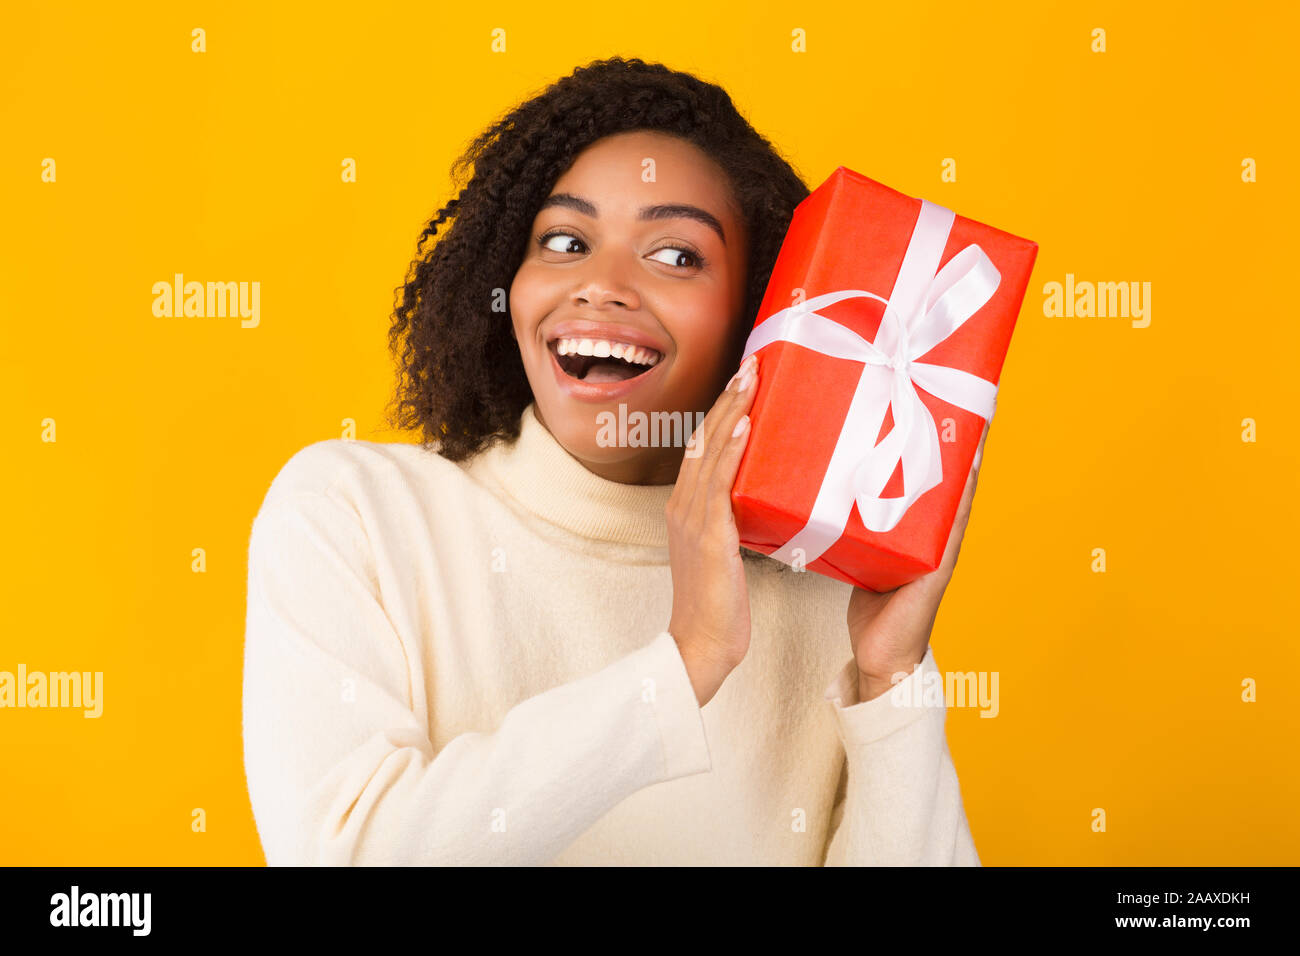 Excited black girl holding new year gift Stock Photo